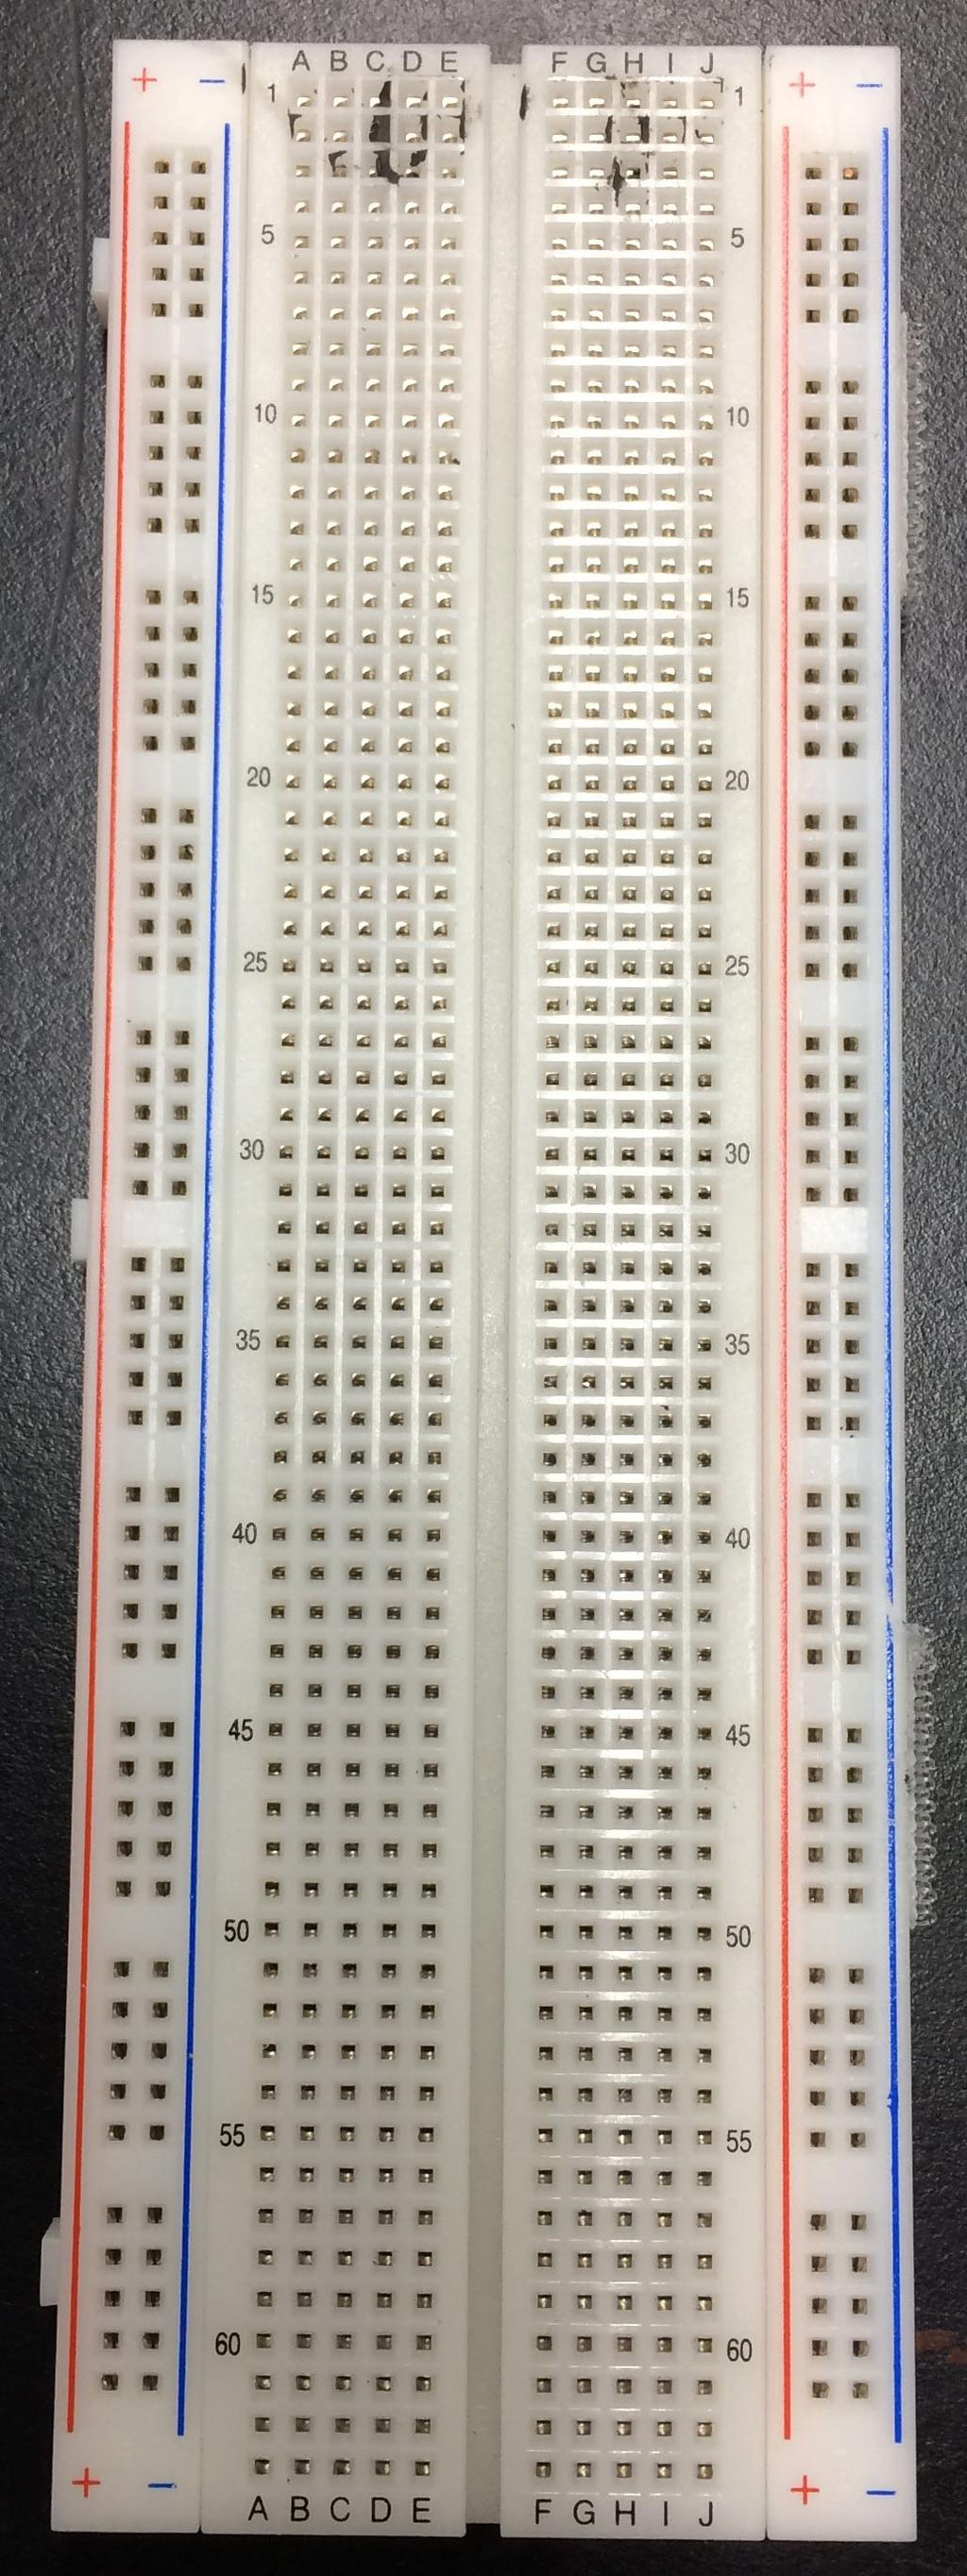 The other style is the small breadboard such as you were probably required to get for E80 or E84. It is lacking several of the conveniences of the larger boards, but is still serviceable.